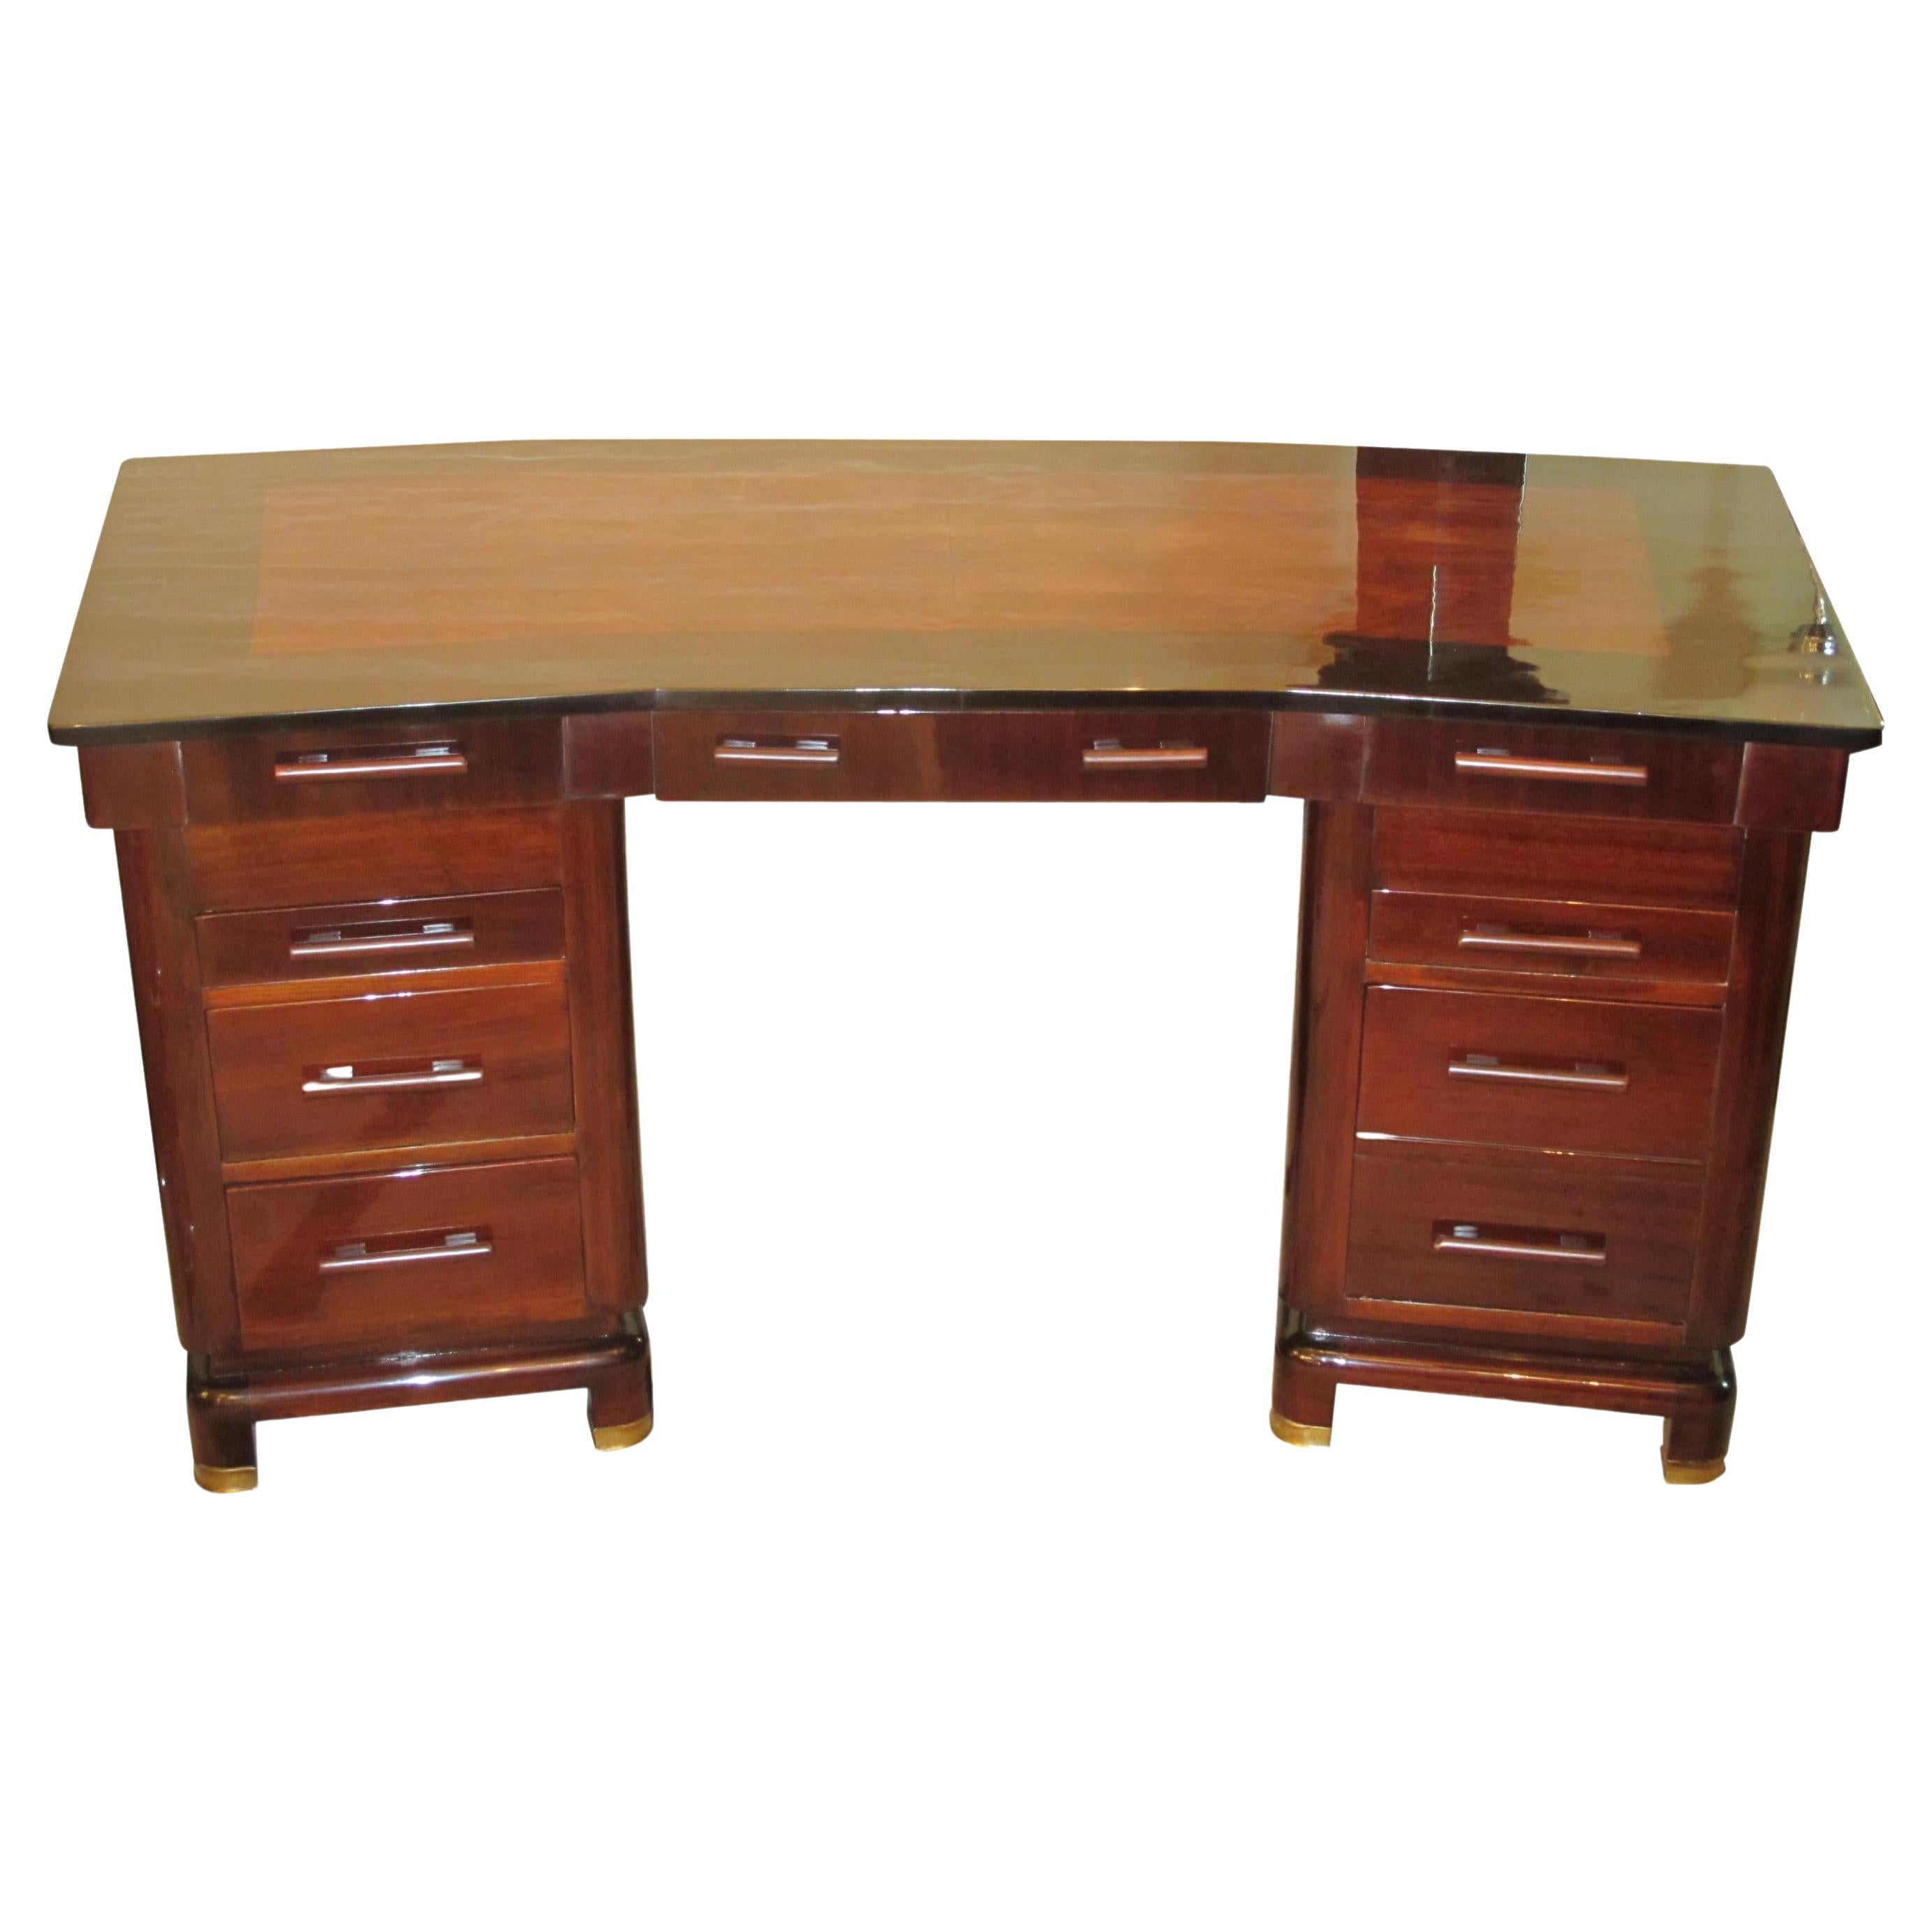 Desk Art Deco in Wood from France 1930 " Free Shipping in Florida " For Sale